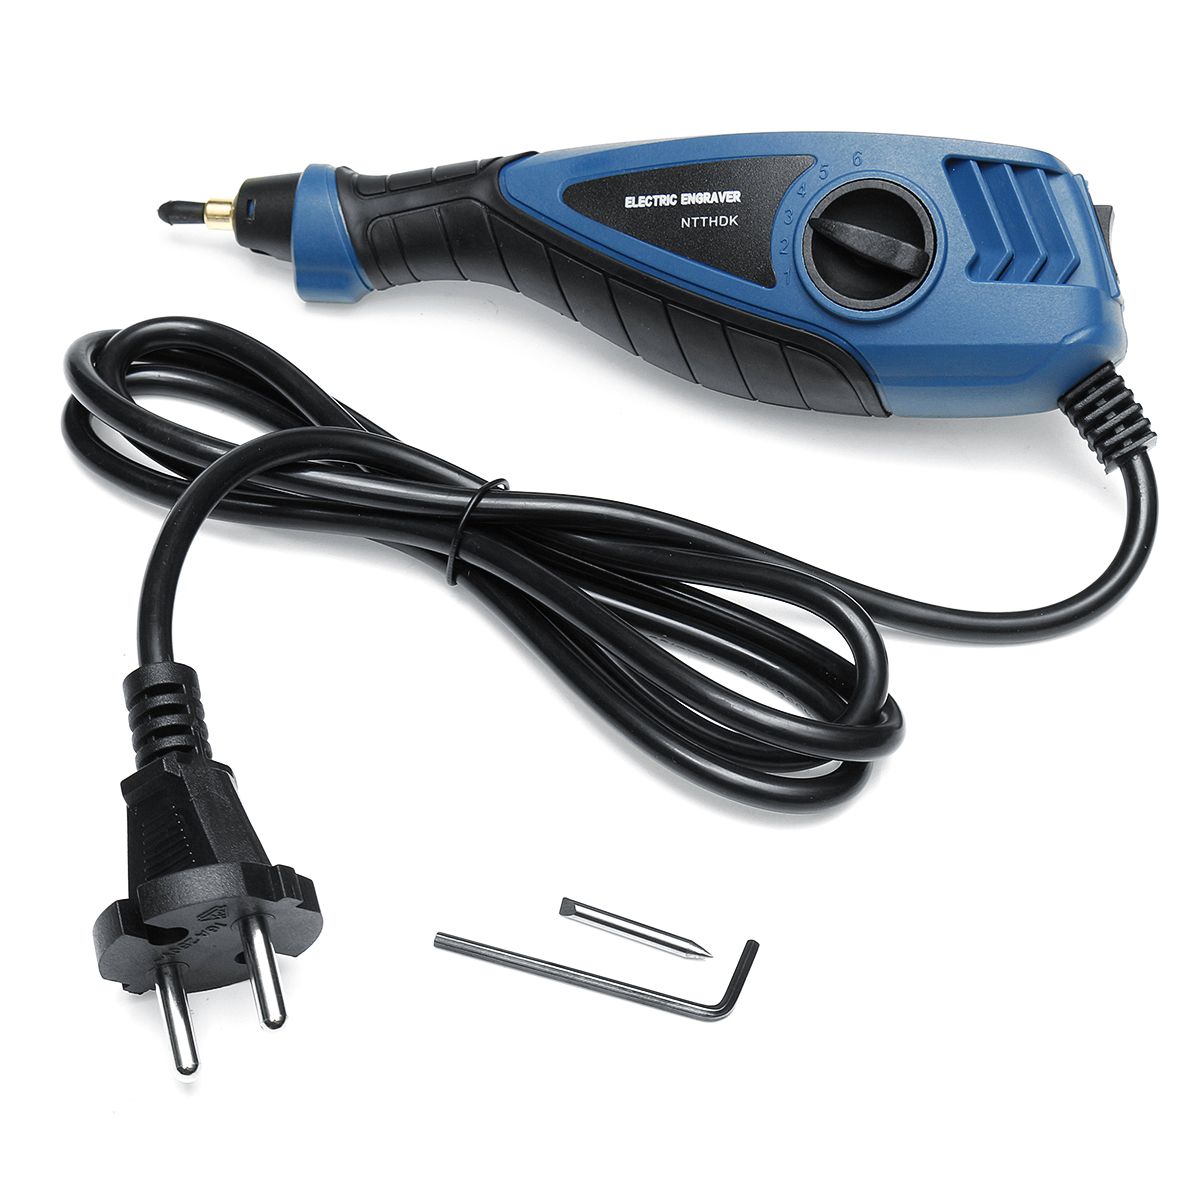 220V-25W-Dremel-Electric-Engraver-Carving-Jewelry-Wood-Metal-Hand-Engraving-Pen-1298729